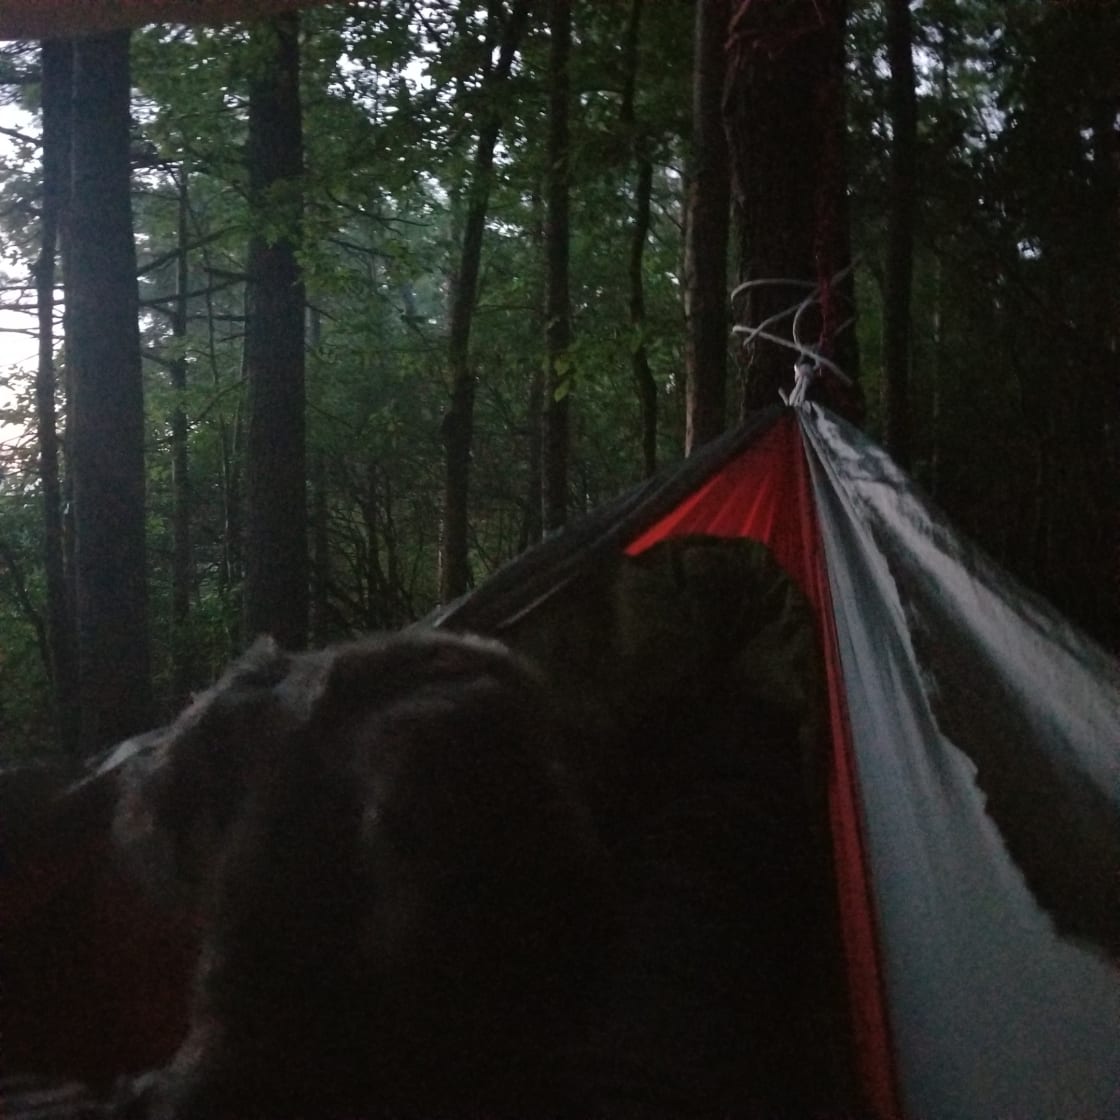 Hammock camping with my 4th best dog in the world.
